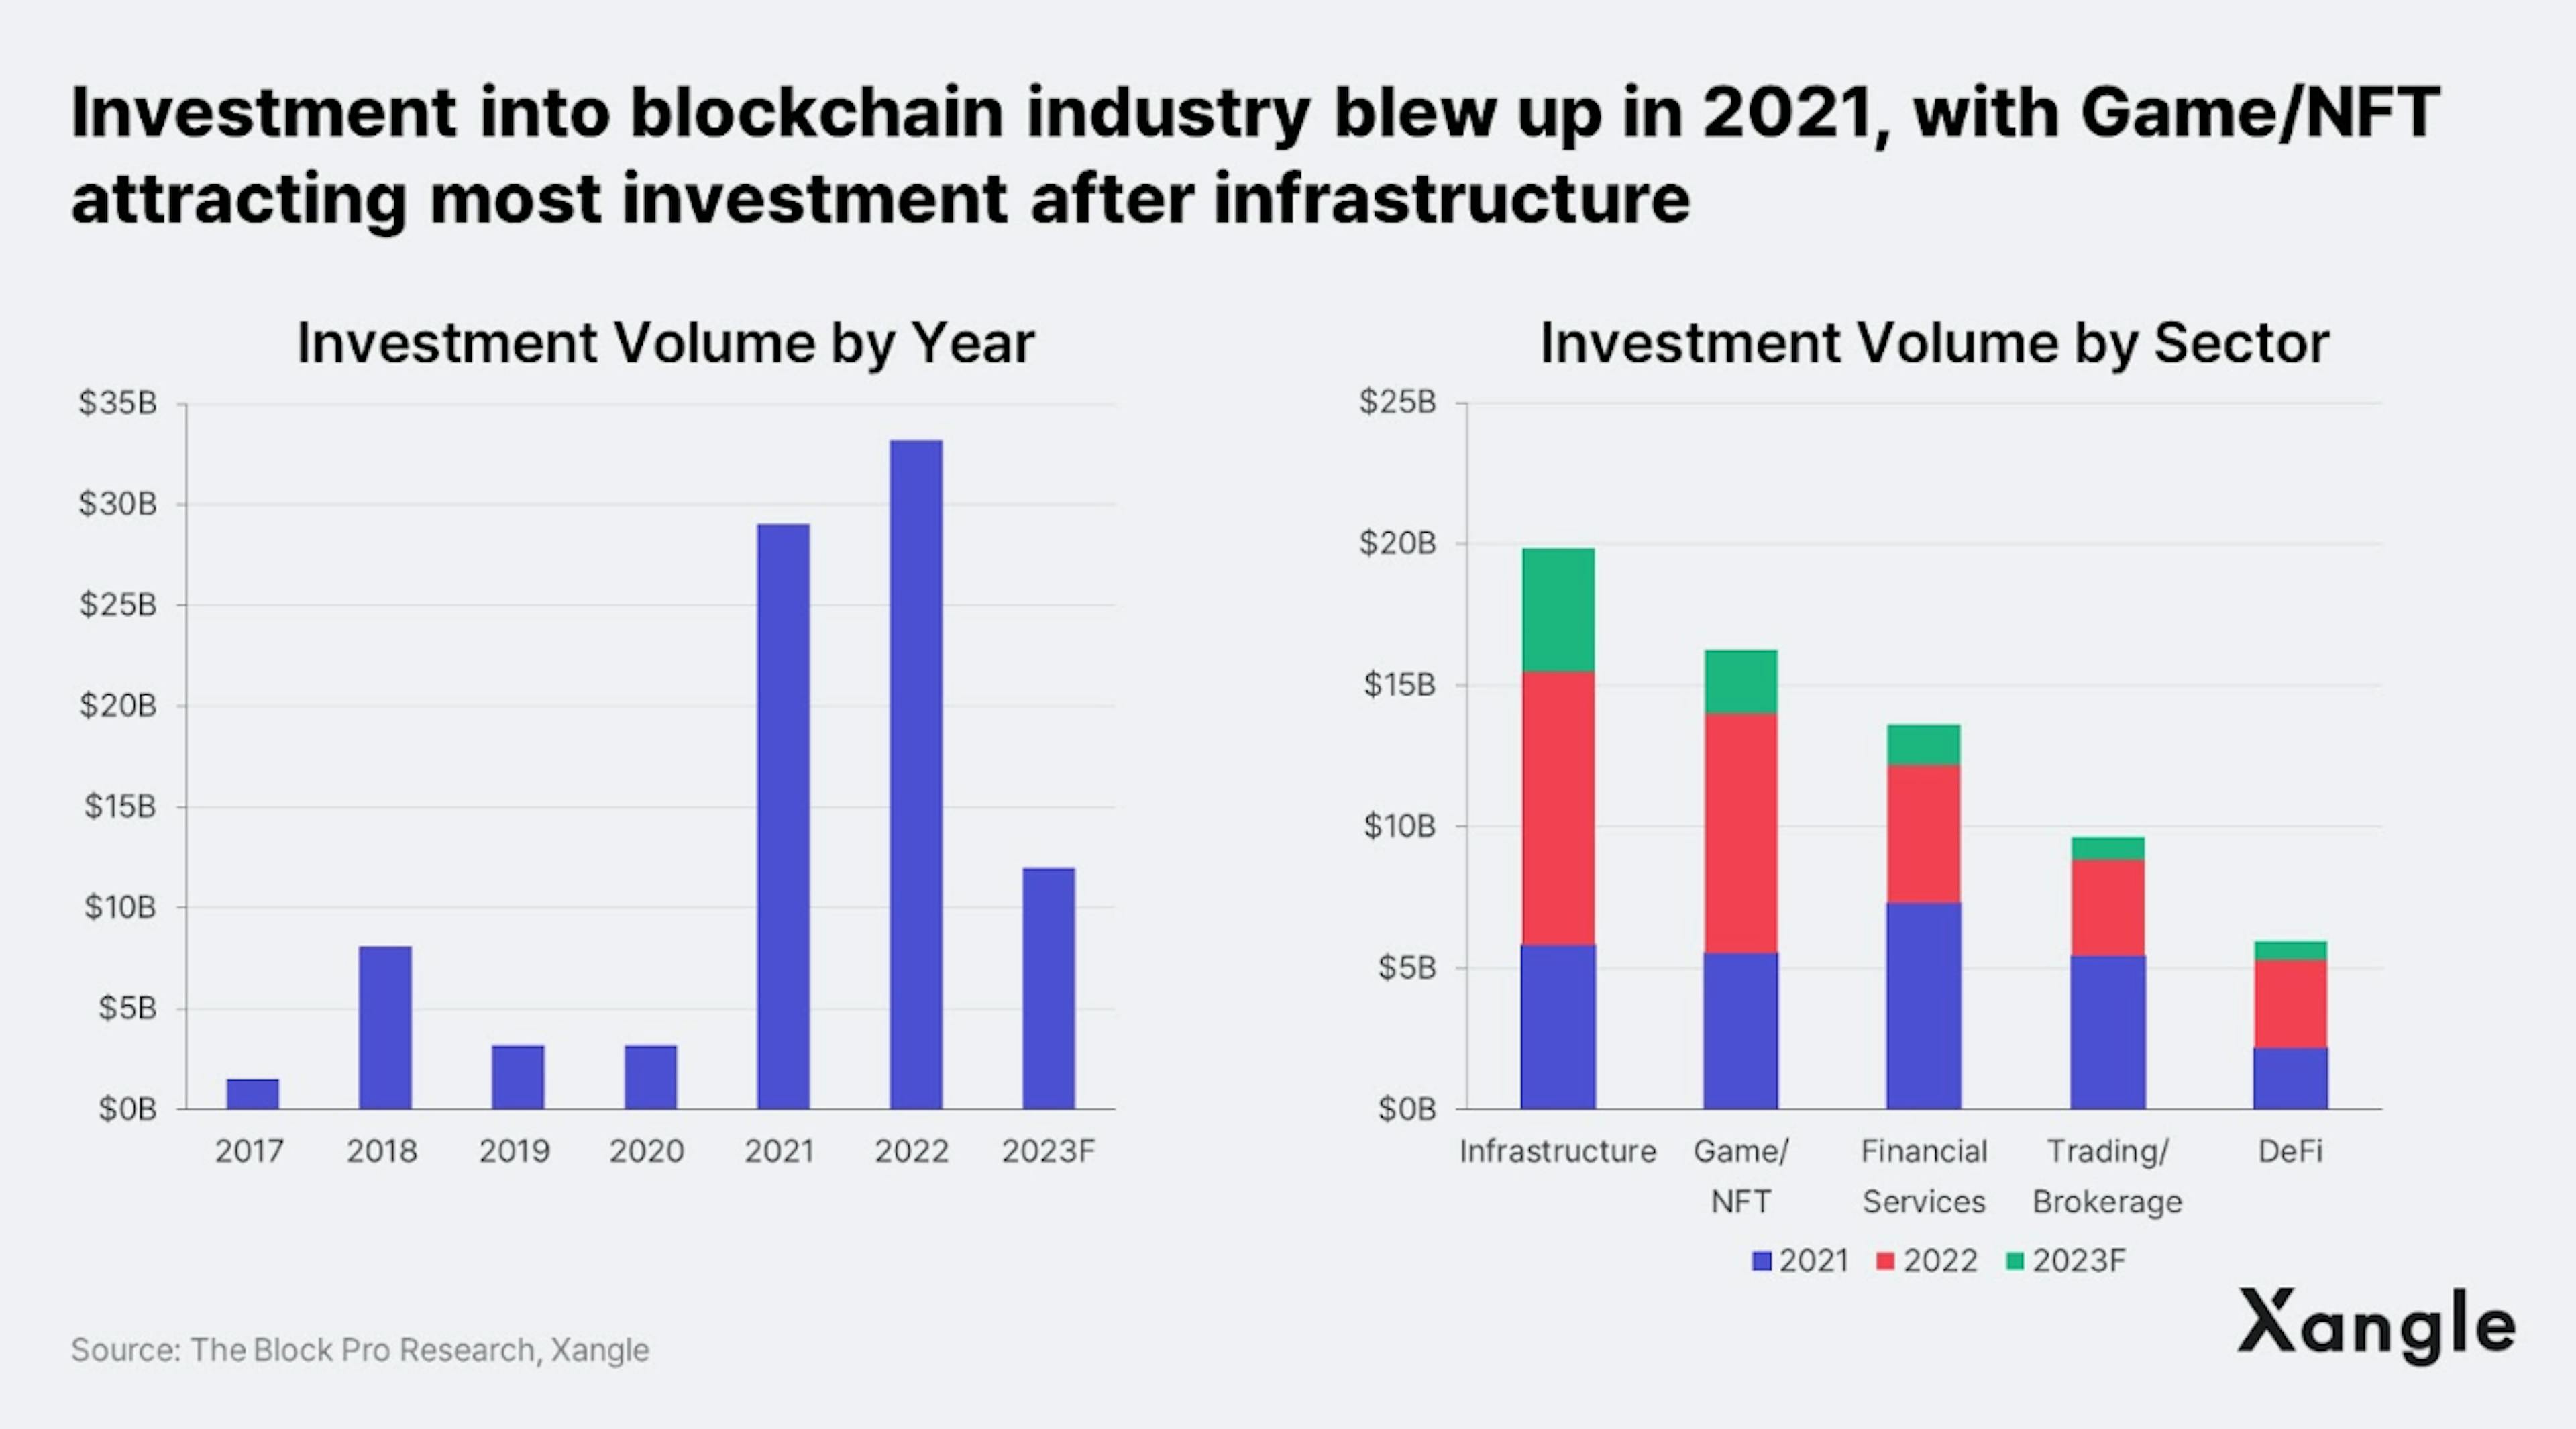 Investment into blockchain industry blew up in 2021 with Game/NFT attracting most investment after infrastructure